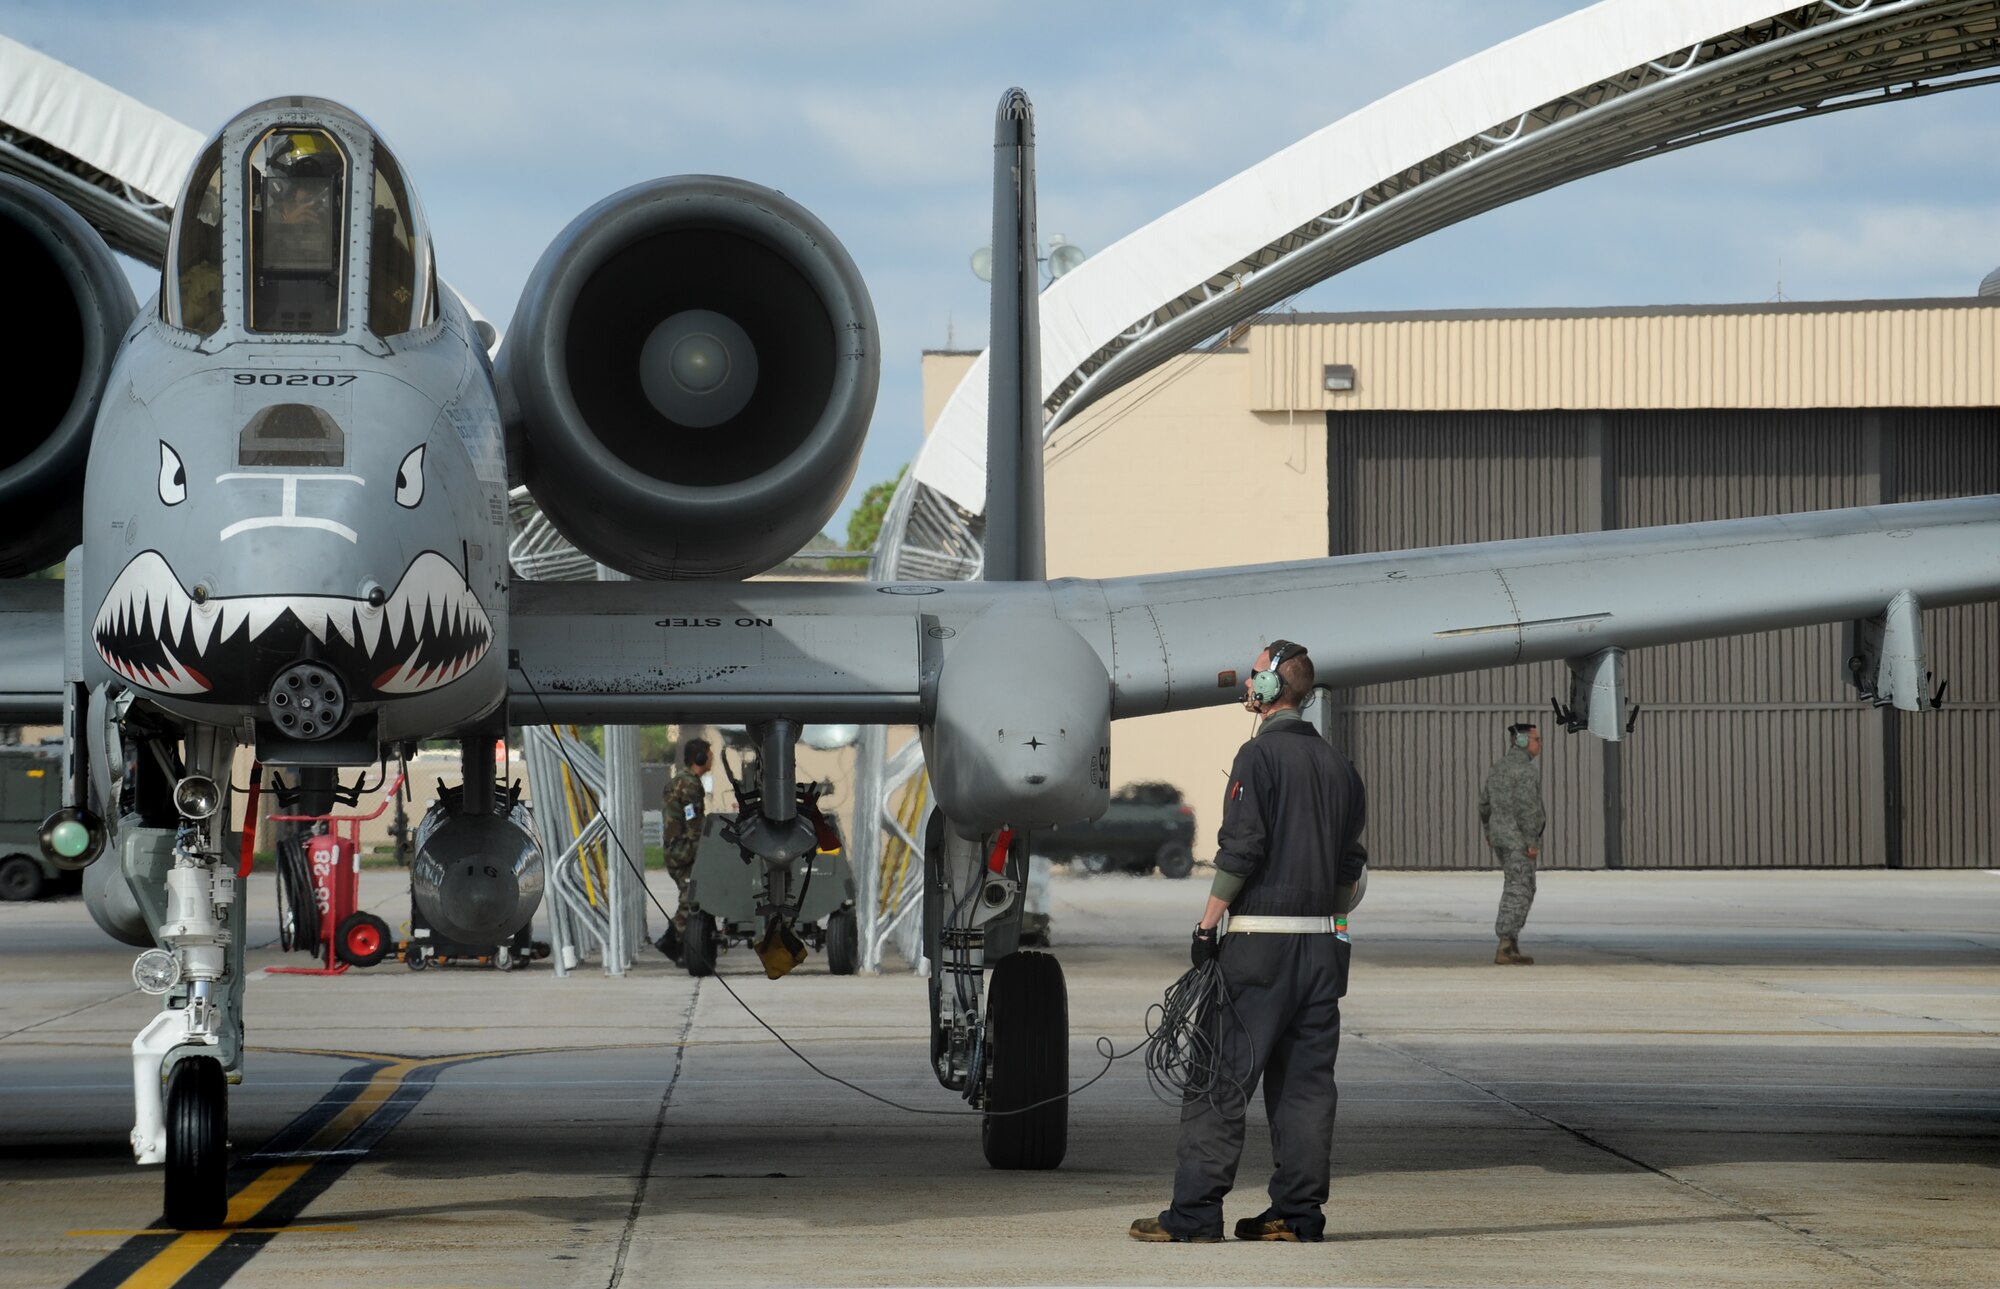 MOODY AIR FORCE BASE, Ga. -- Staff Sgt. Todd Mesman, 75th Aircraft Maintenance Unit A-10C Thunderbolt II crew chief, prepares an A-10 for launch to Red Flag here Oct. 17. The Red Flag exercise is conducted on the 15,000-square-mile Nevada Test and Training Range, north of Las Vegas, and will last approximately three weeks. (U.S. Air Force photo by Staff Sgt. Elizabeth Rissmiller)